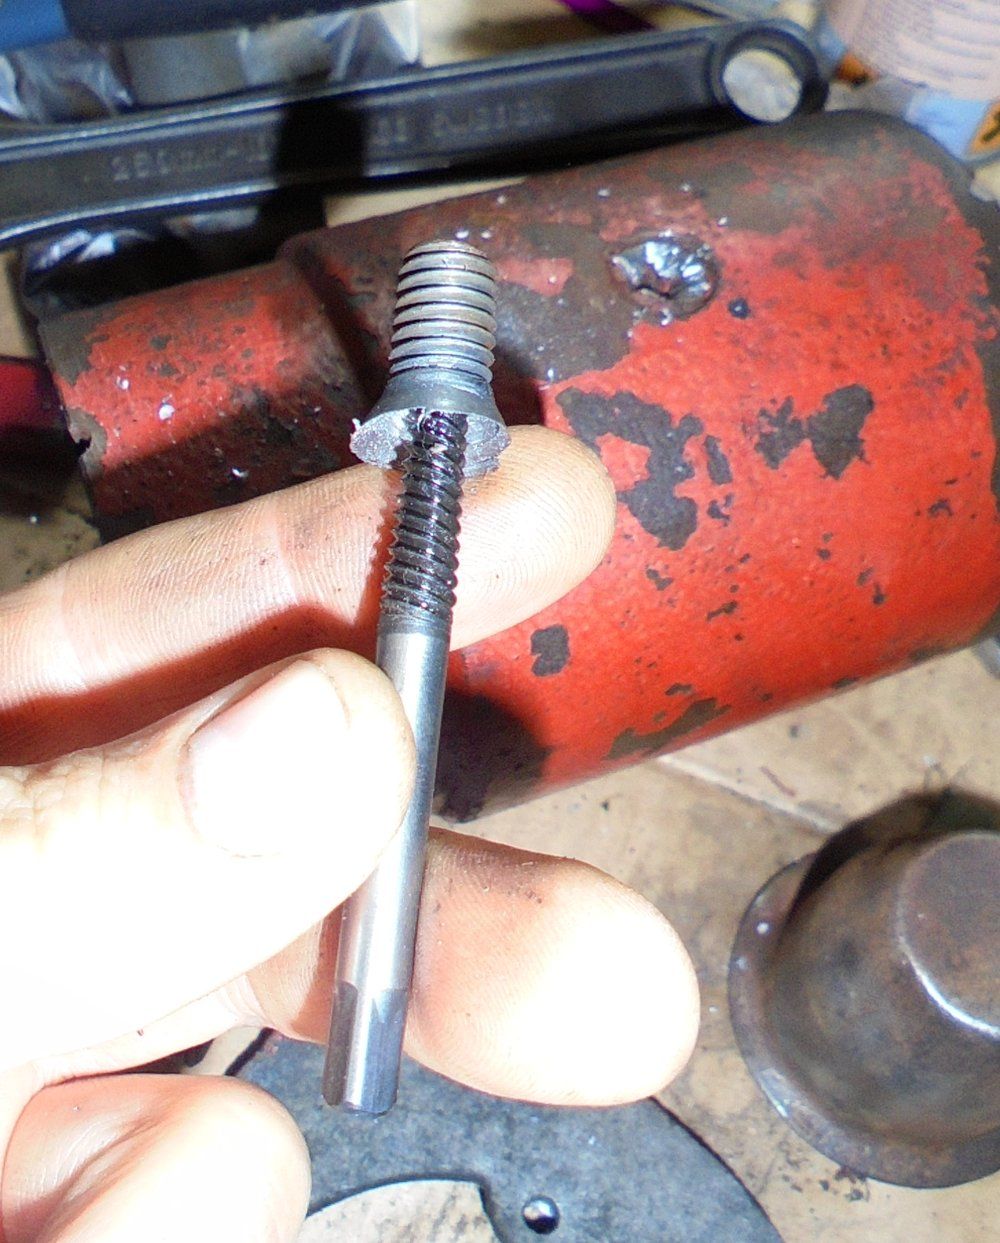 1965 series 2a station wagon dynamo screws for magnets removed at last1.JPG